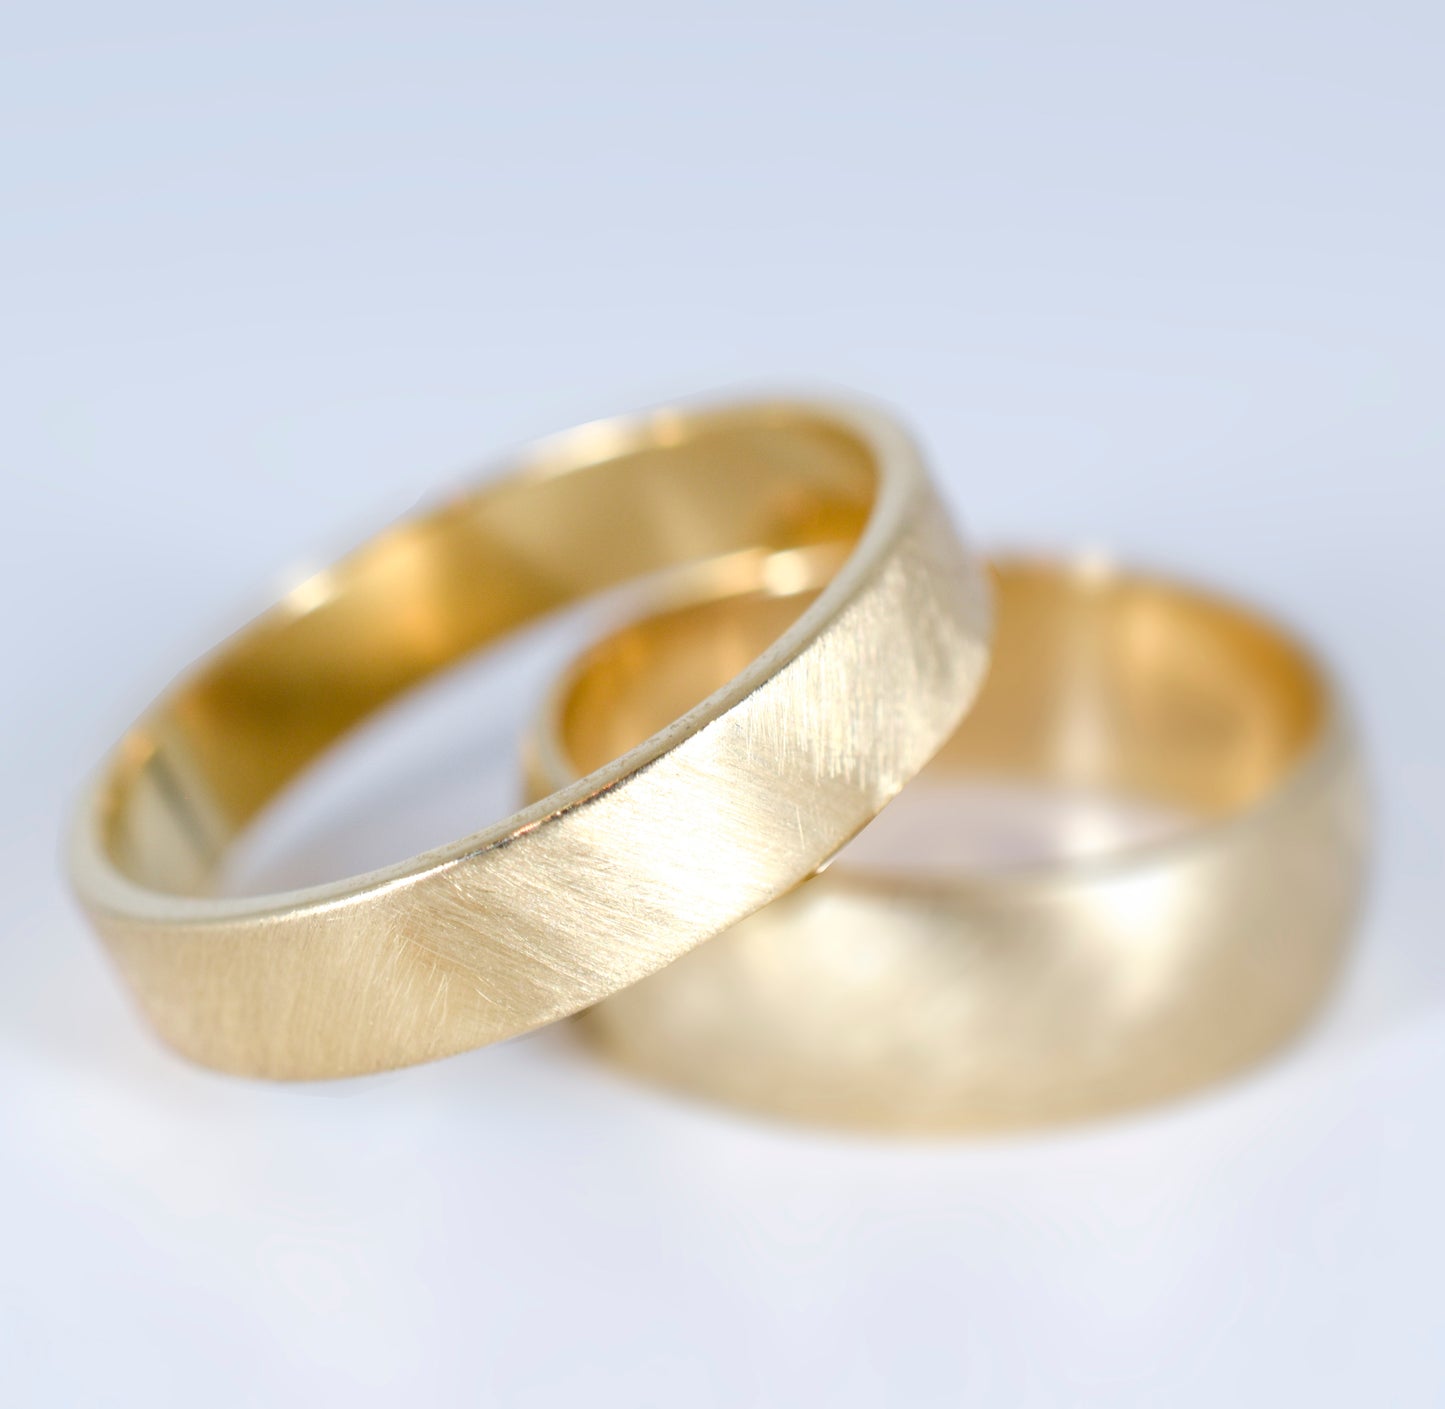 two yellow gold bands with a brushed textured finish stacked together with on in focus and one out of focus on a grey background